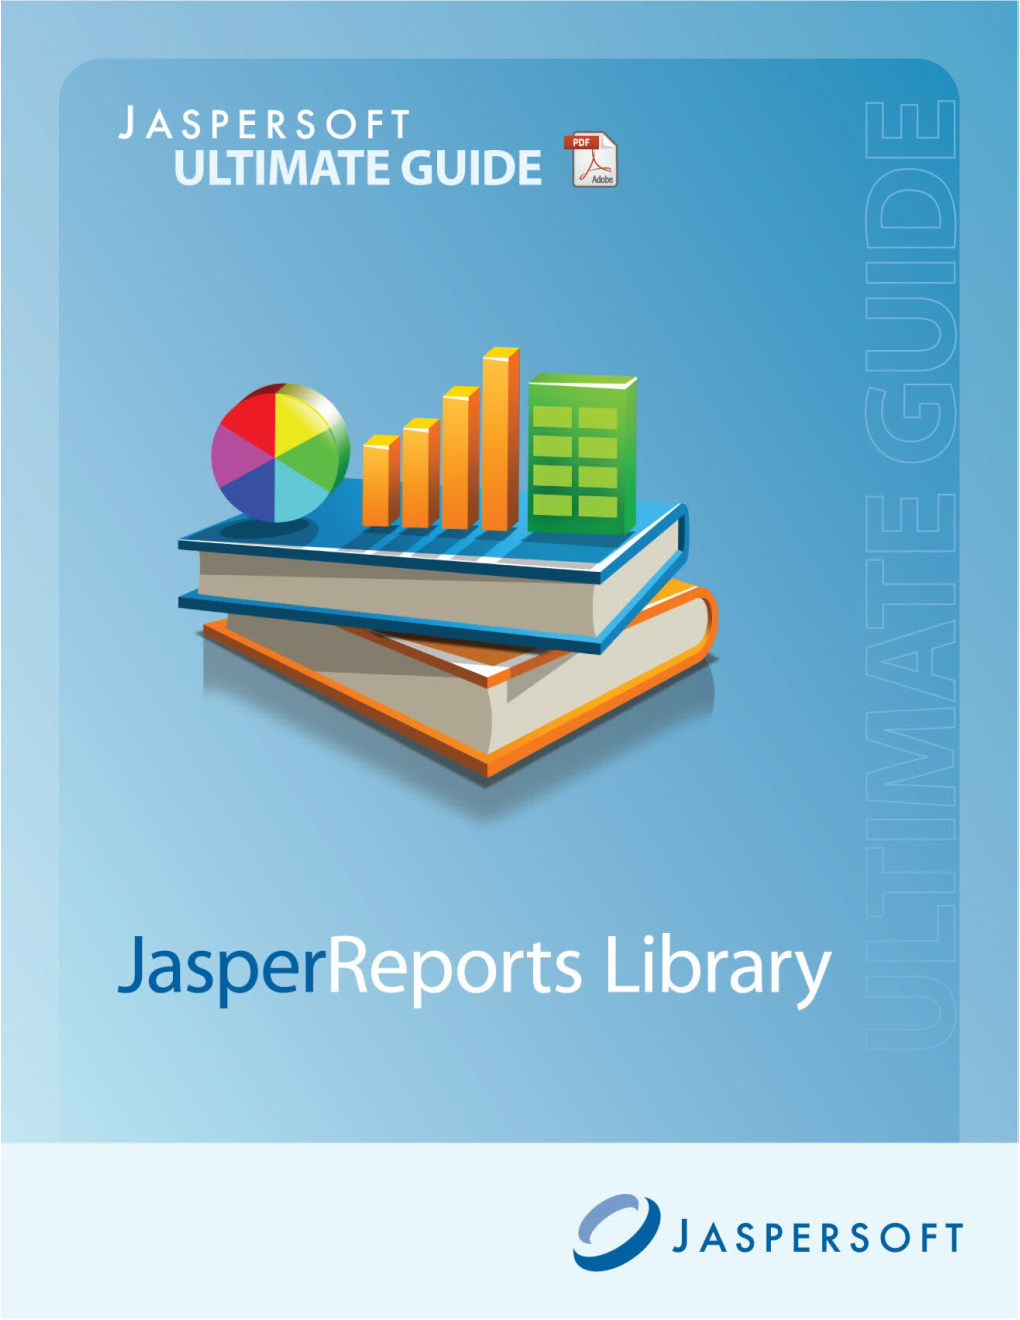 The Jasperreports Ultimate Guide Third Edition Copyright © 2011 Jaspersoft Corporation